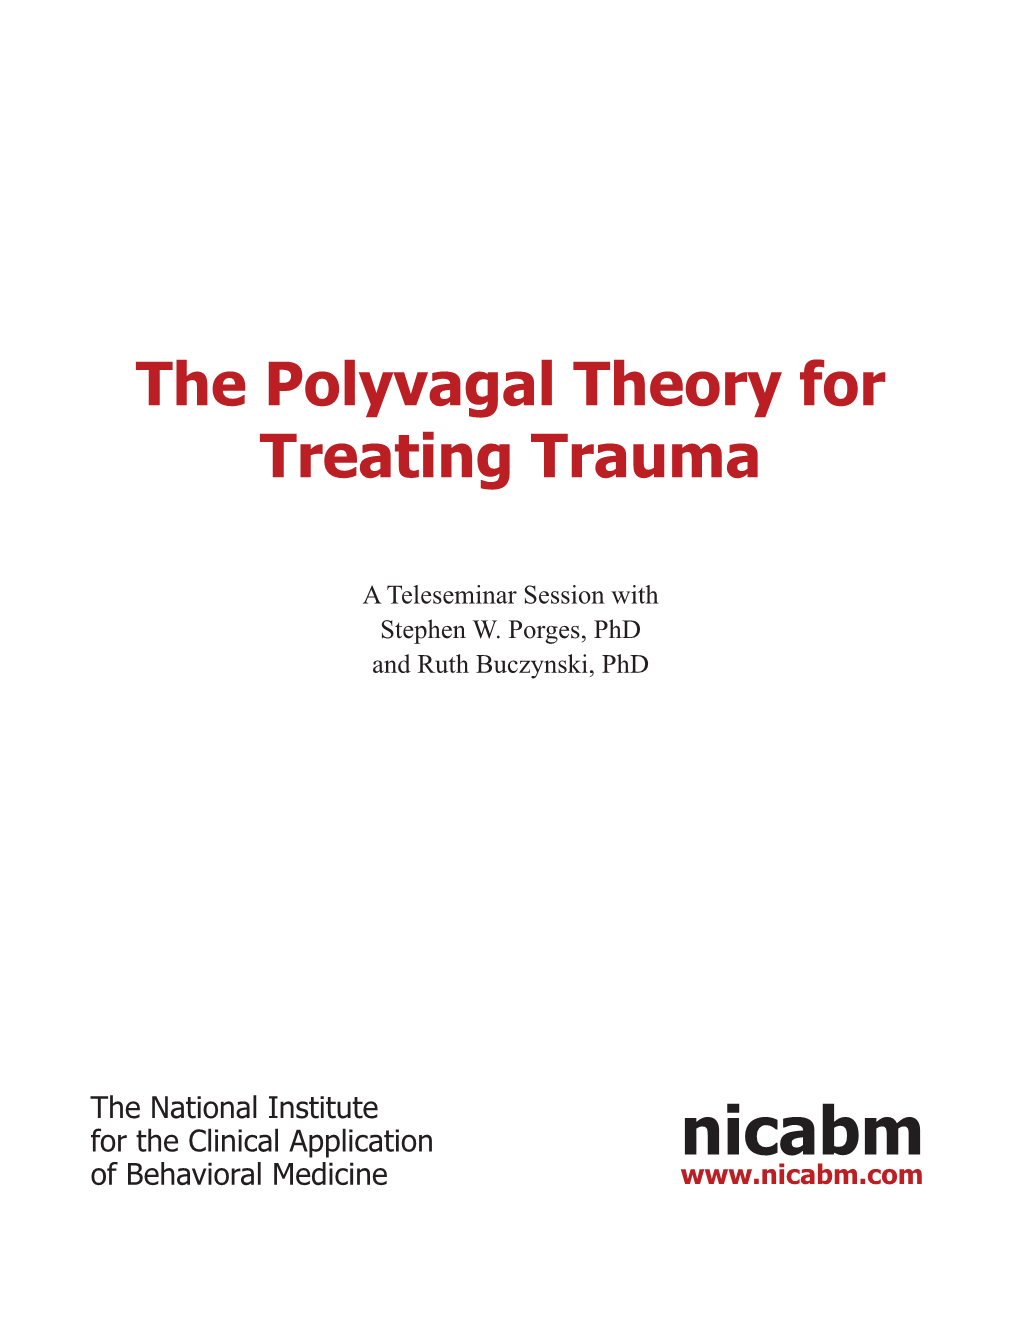 The Polyvagal Theory's Use in Treating Trauma